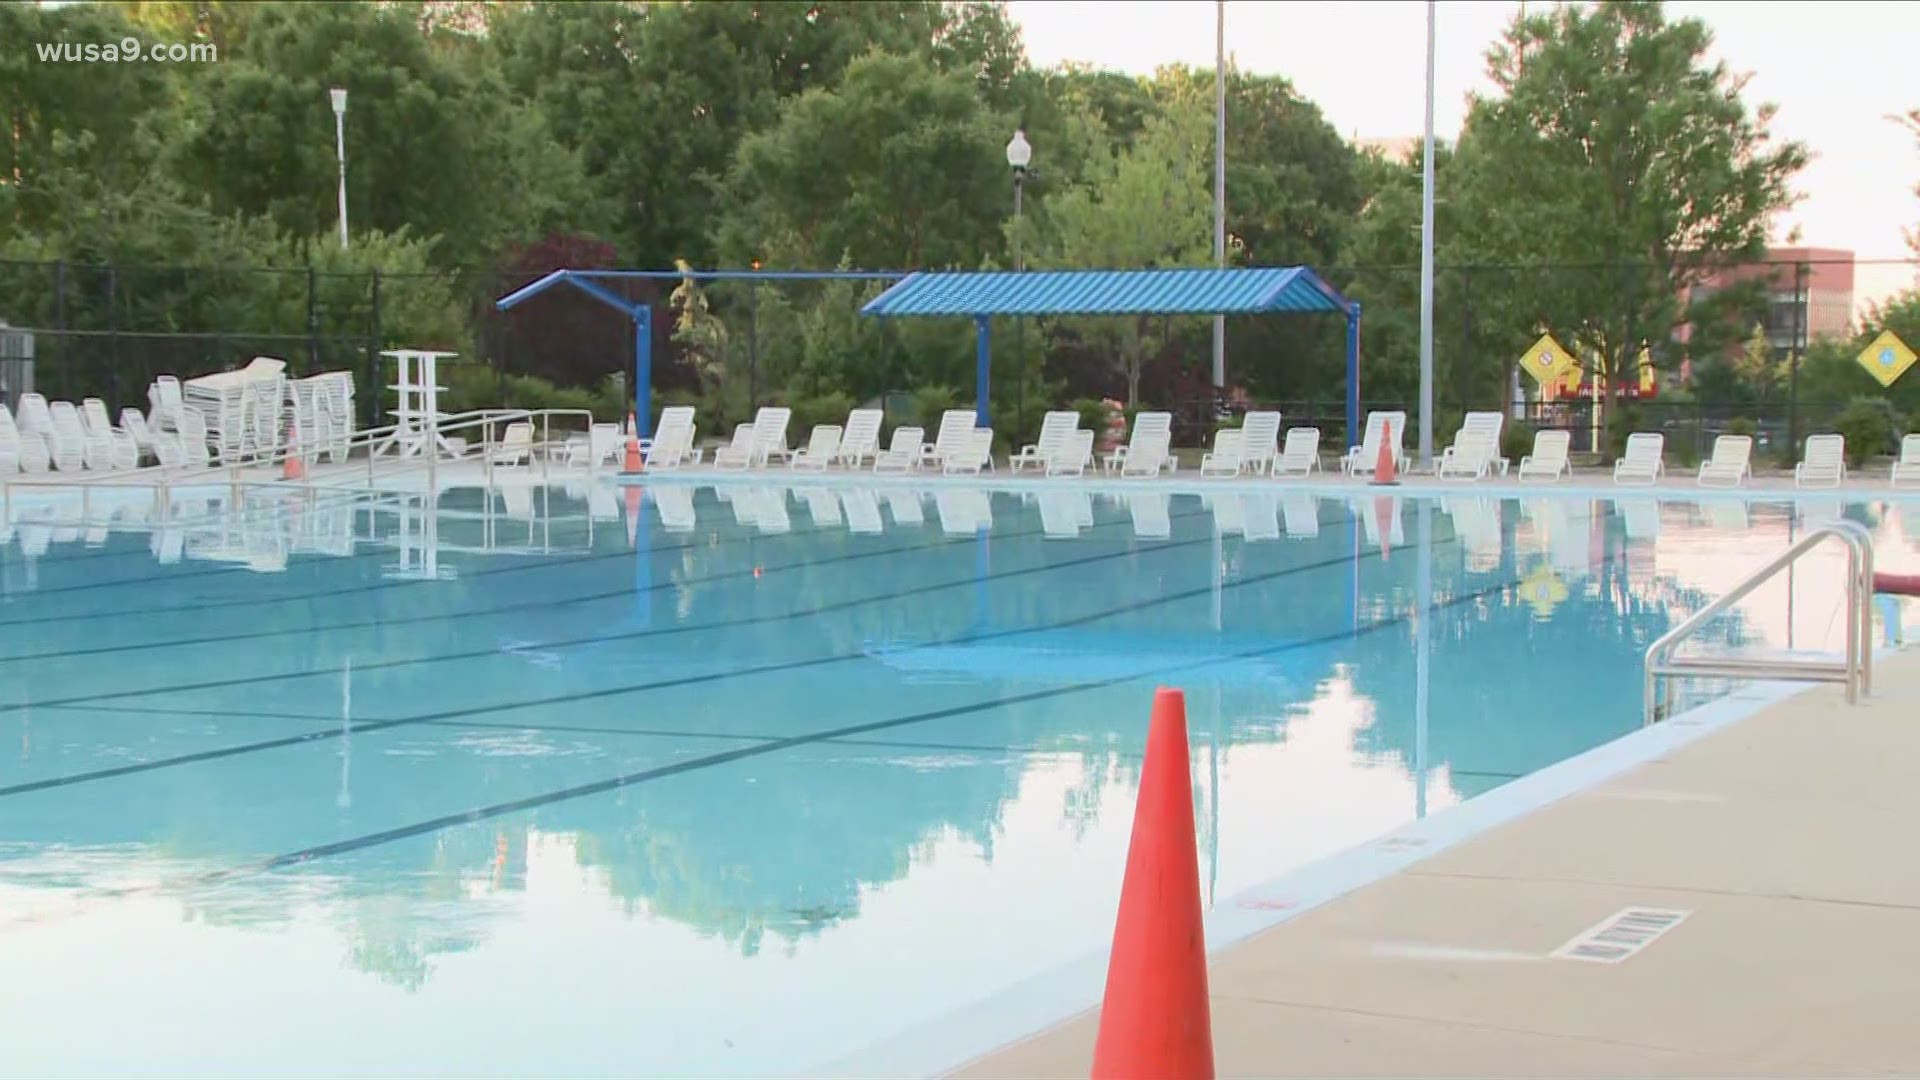 Local swim instructor and owner of WeAquatics Swim School, David Worrell, shares some water safety tips.